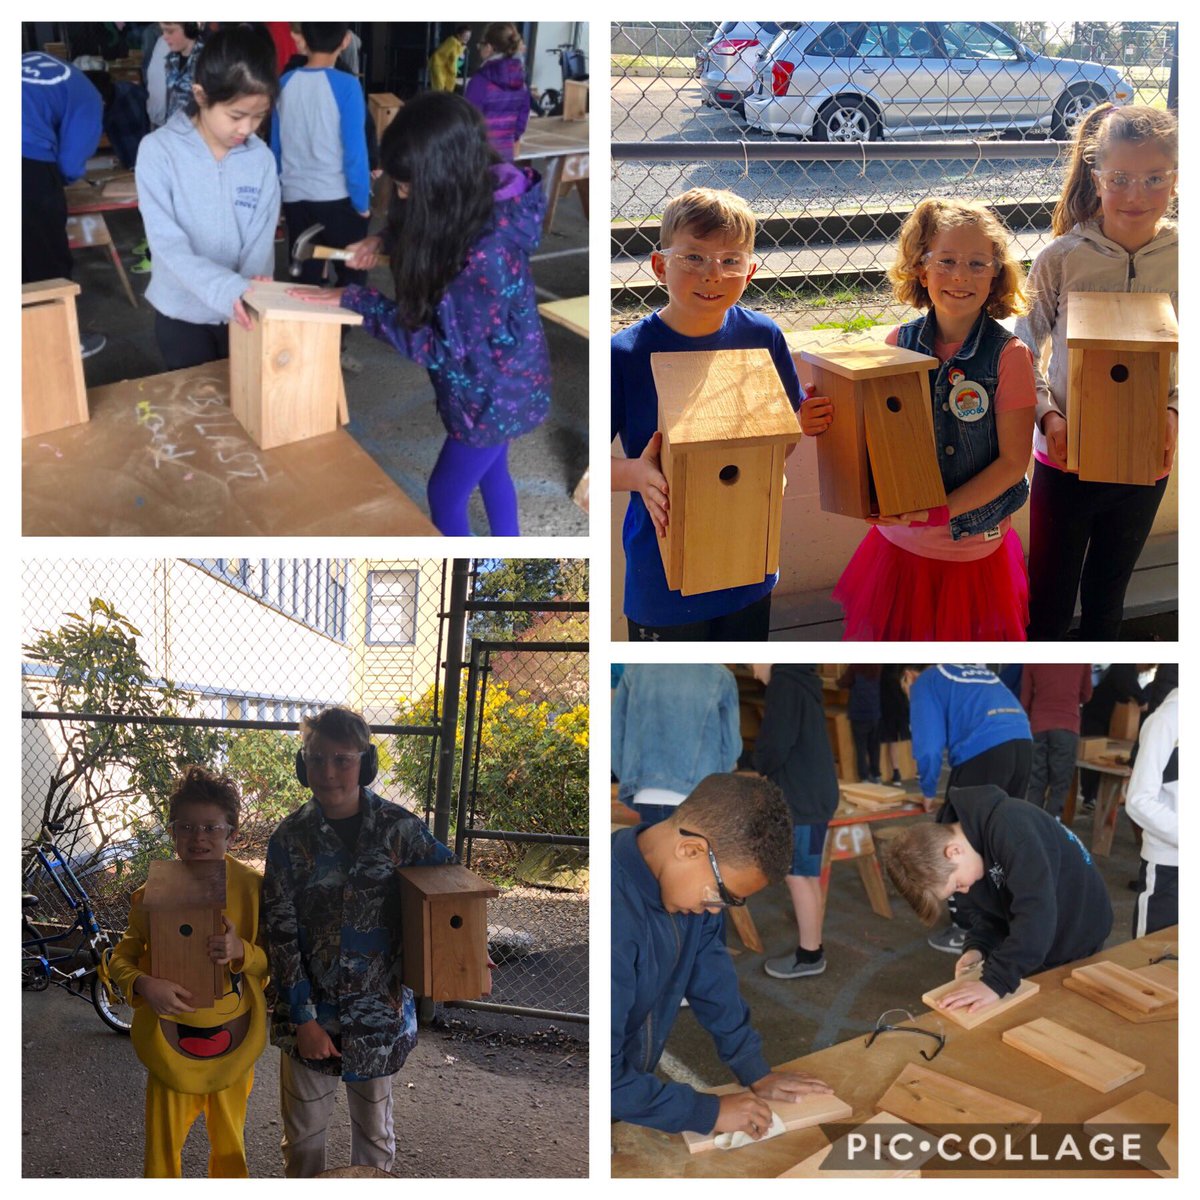 50+ 🐦🏠 complete✅ Hardwork, determination and collaboration👍 The look on the SS faces when they completed their project was something I will never forget😊 Thank you @DivisionW and your SS for guiding my 3/4s. We ❤️ building in our #makerspace @ScottSmithSD36 #sd36learn